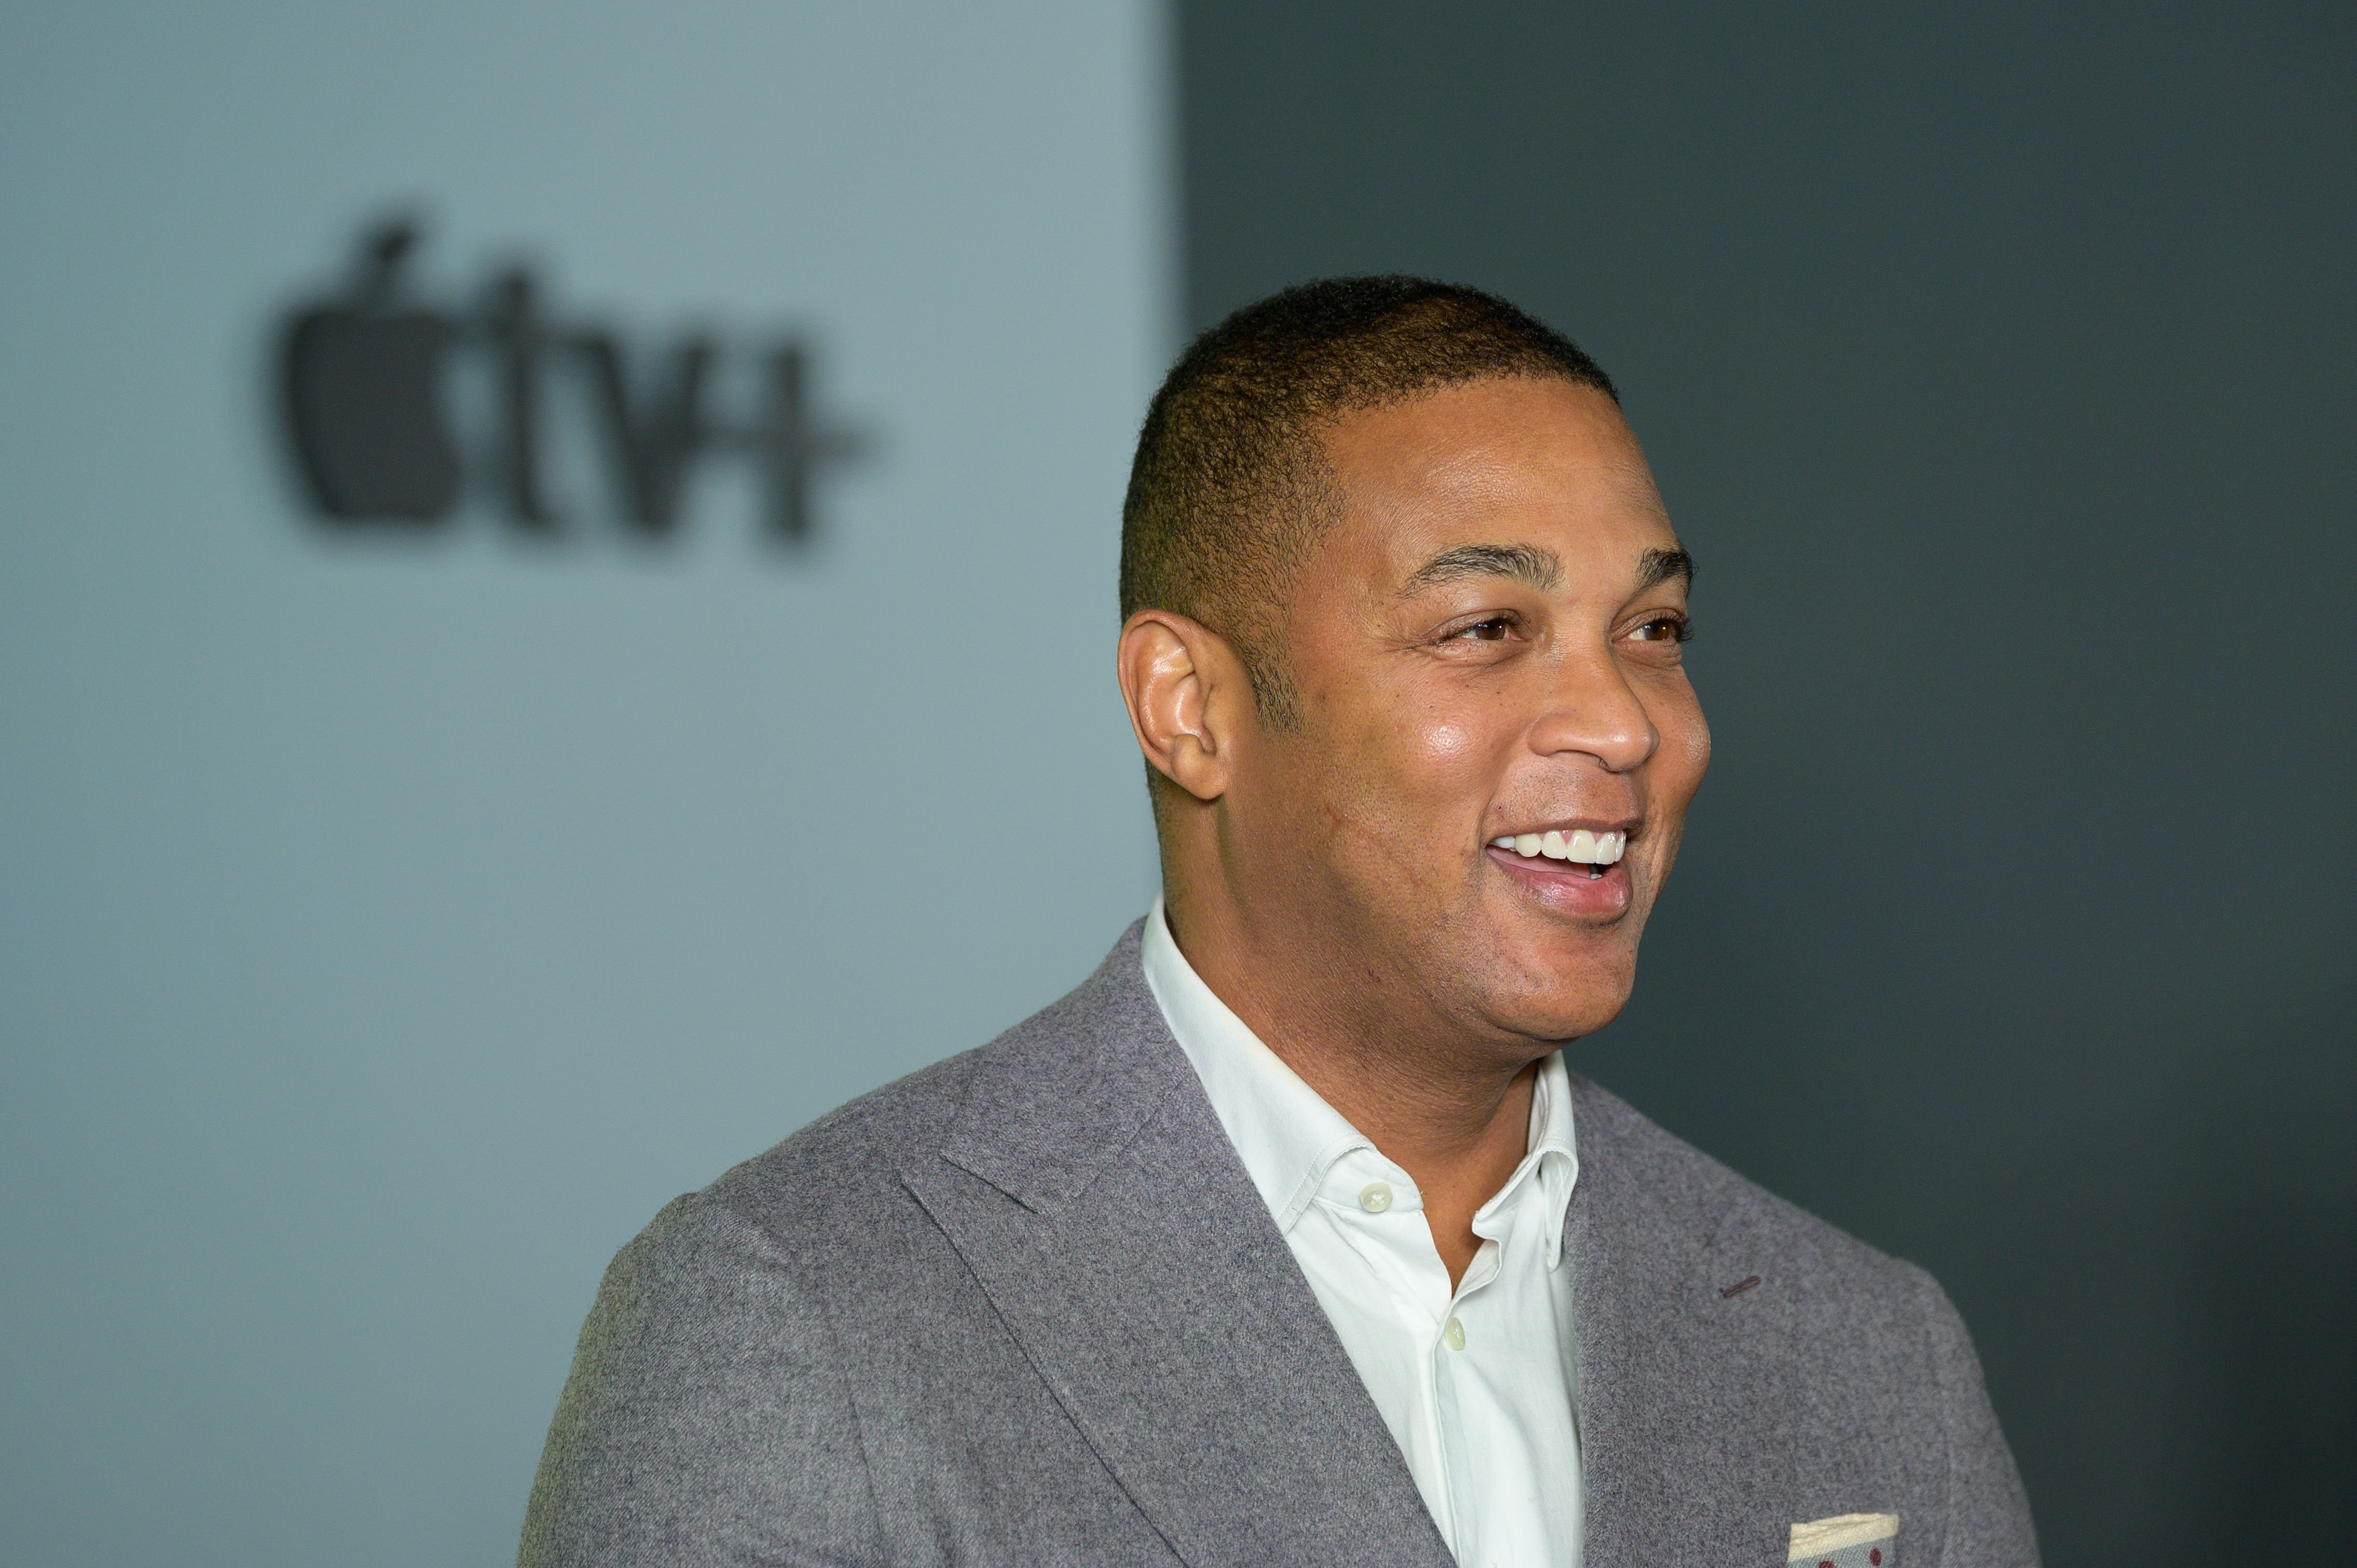 CNN Anchor Don Lemon at a premiere on October 28, 2019 in New York. | Photo: Getty Images